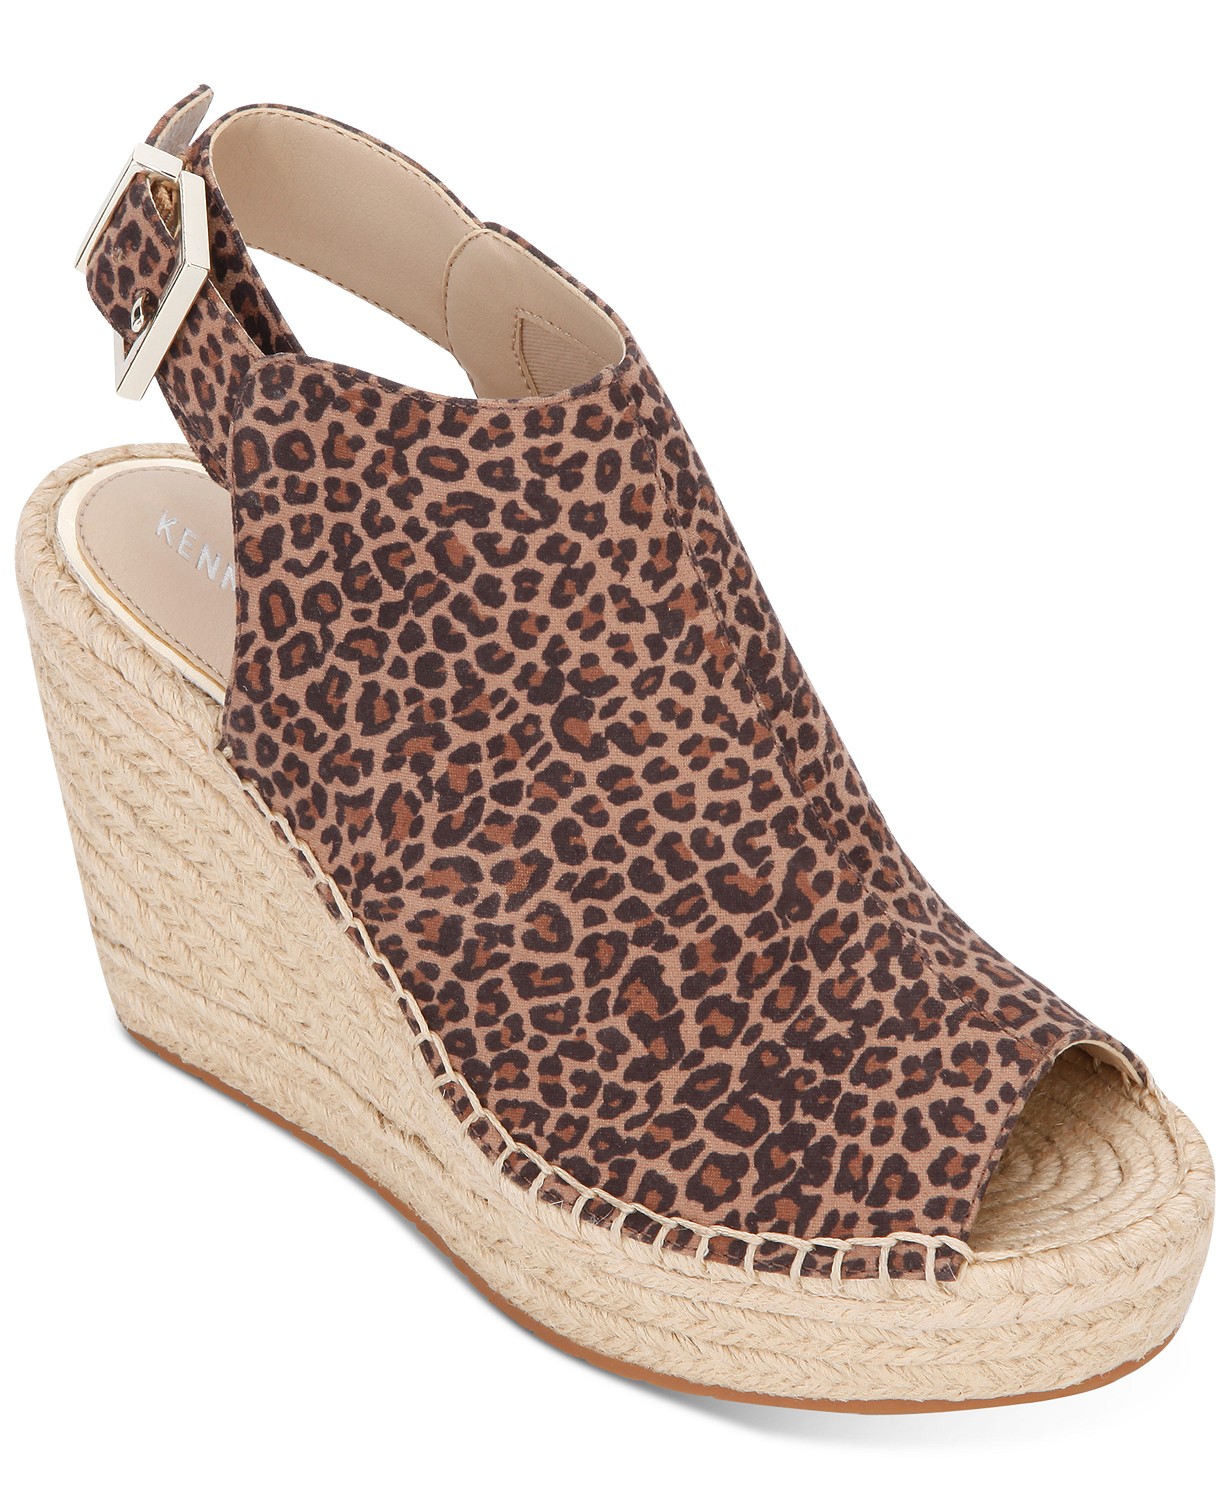 www.couturepoint.com-gentle-souls-by-kenneth-cole-womens-yellow-leather-charli-elastic-espadrille-wedge-sandals-copy